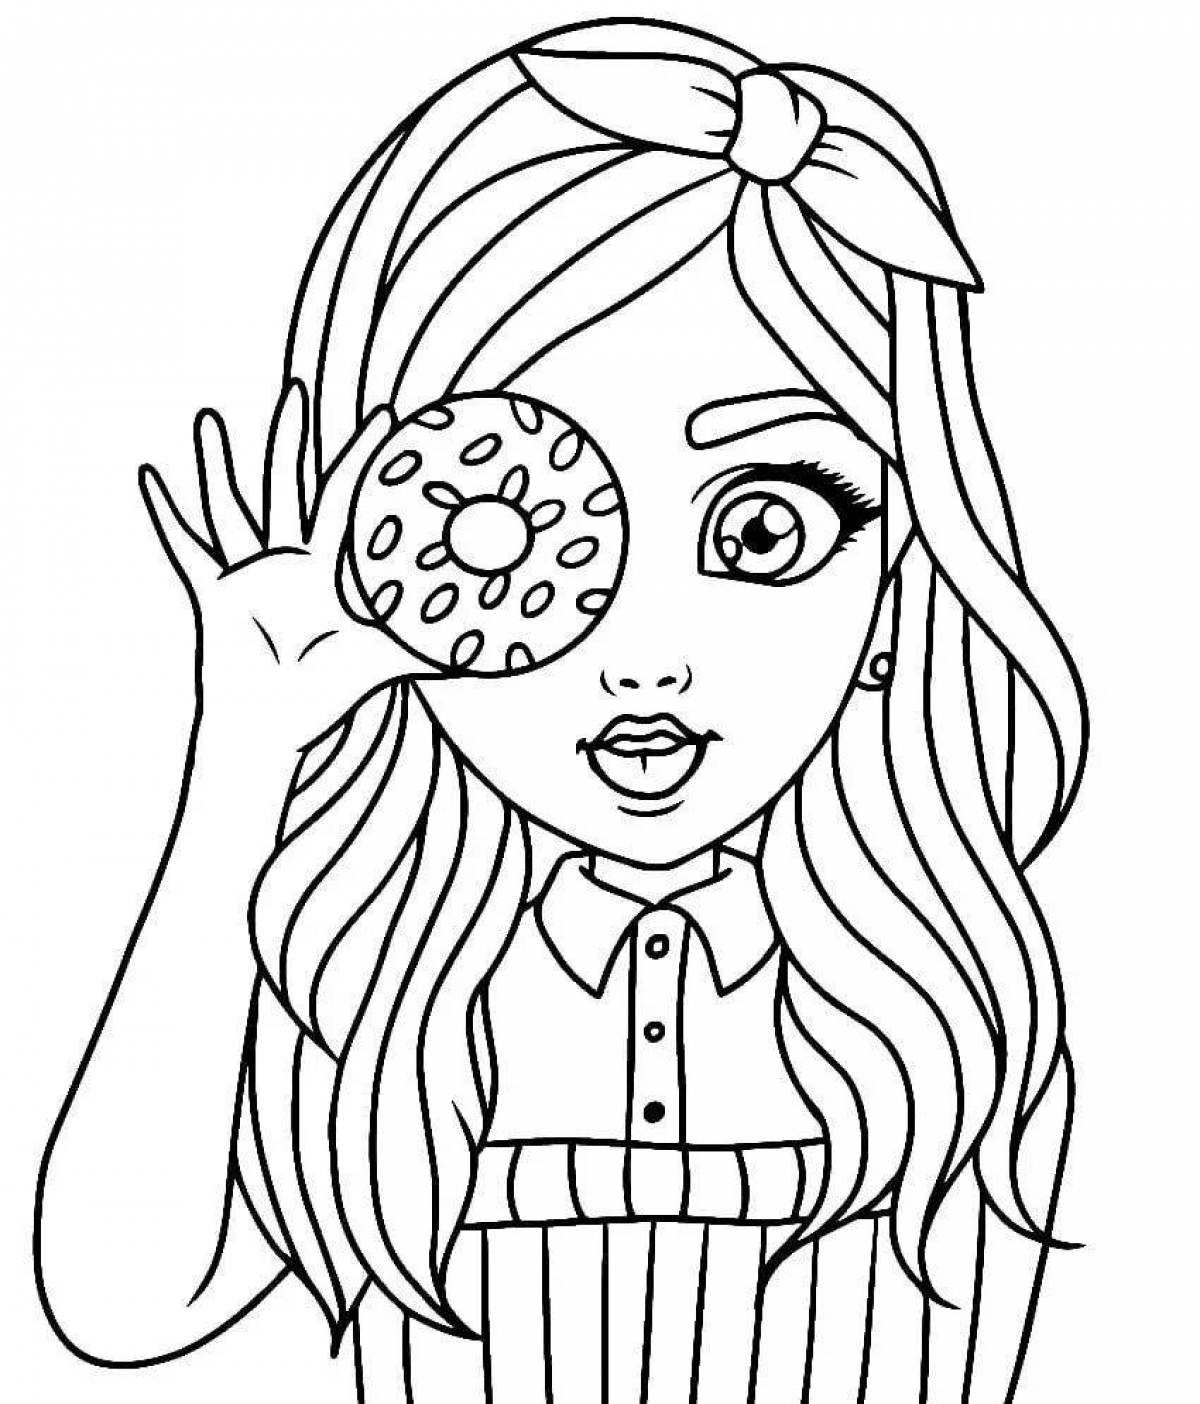 Special coloring book for girls aged 13